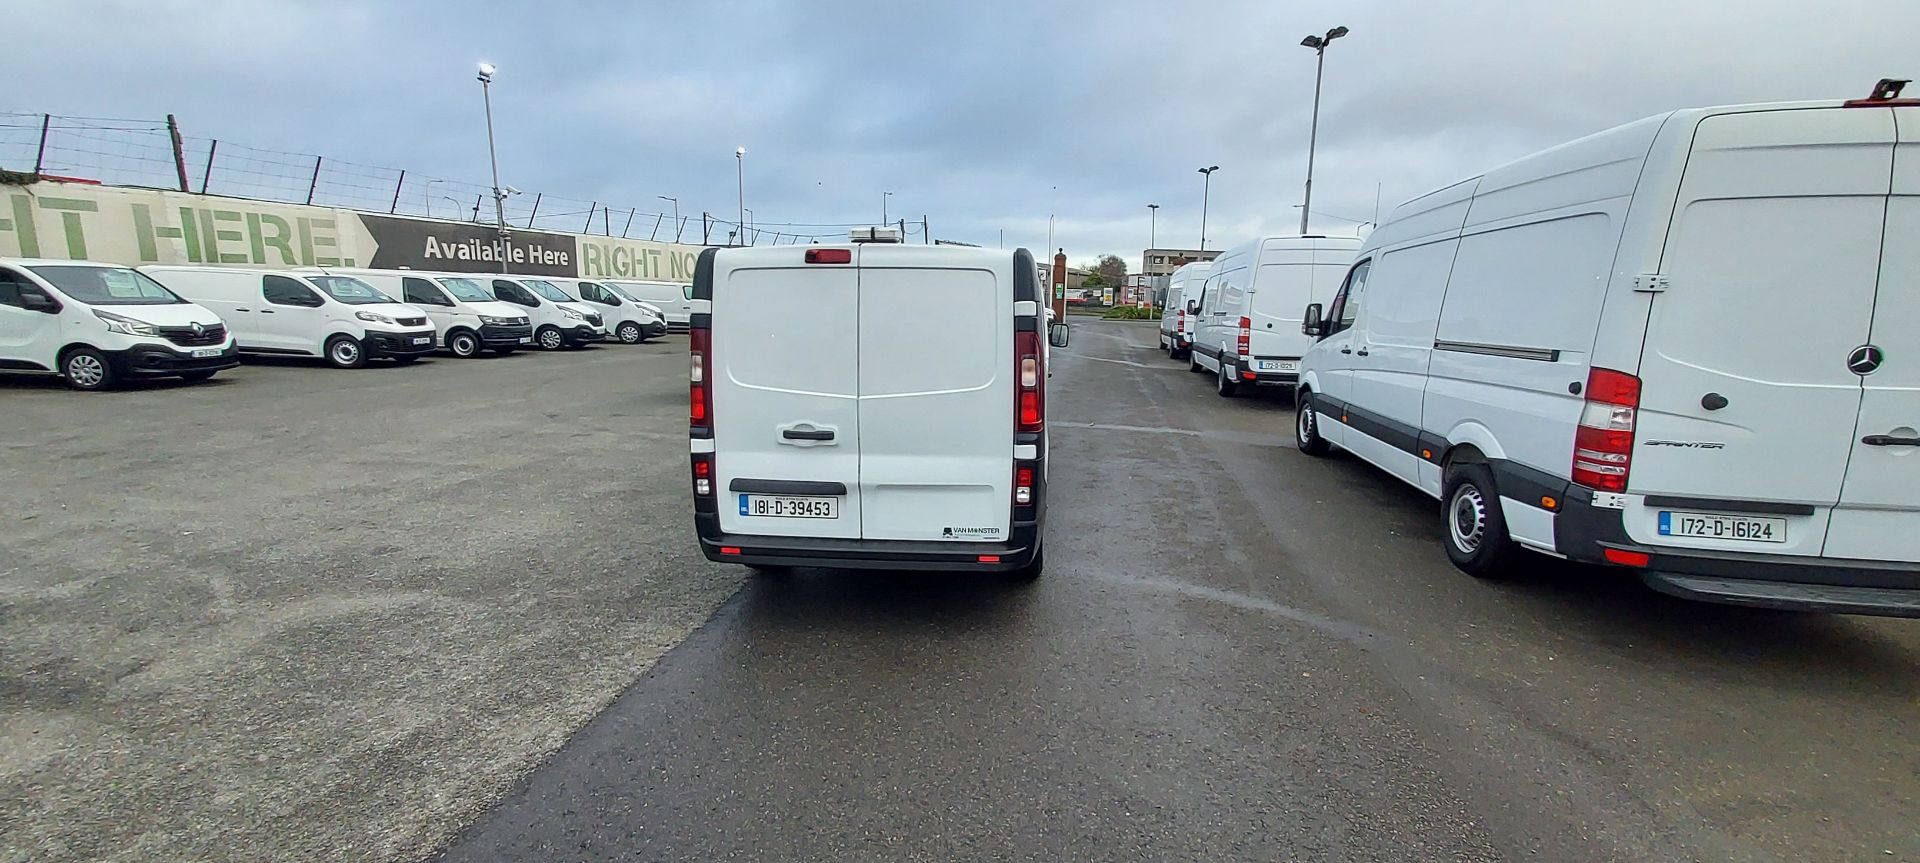 2018 Renault Trafic LL29 DCI 120 Business 3DR (181D39453) Image 6